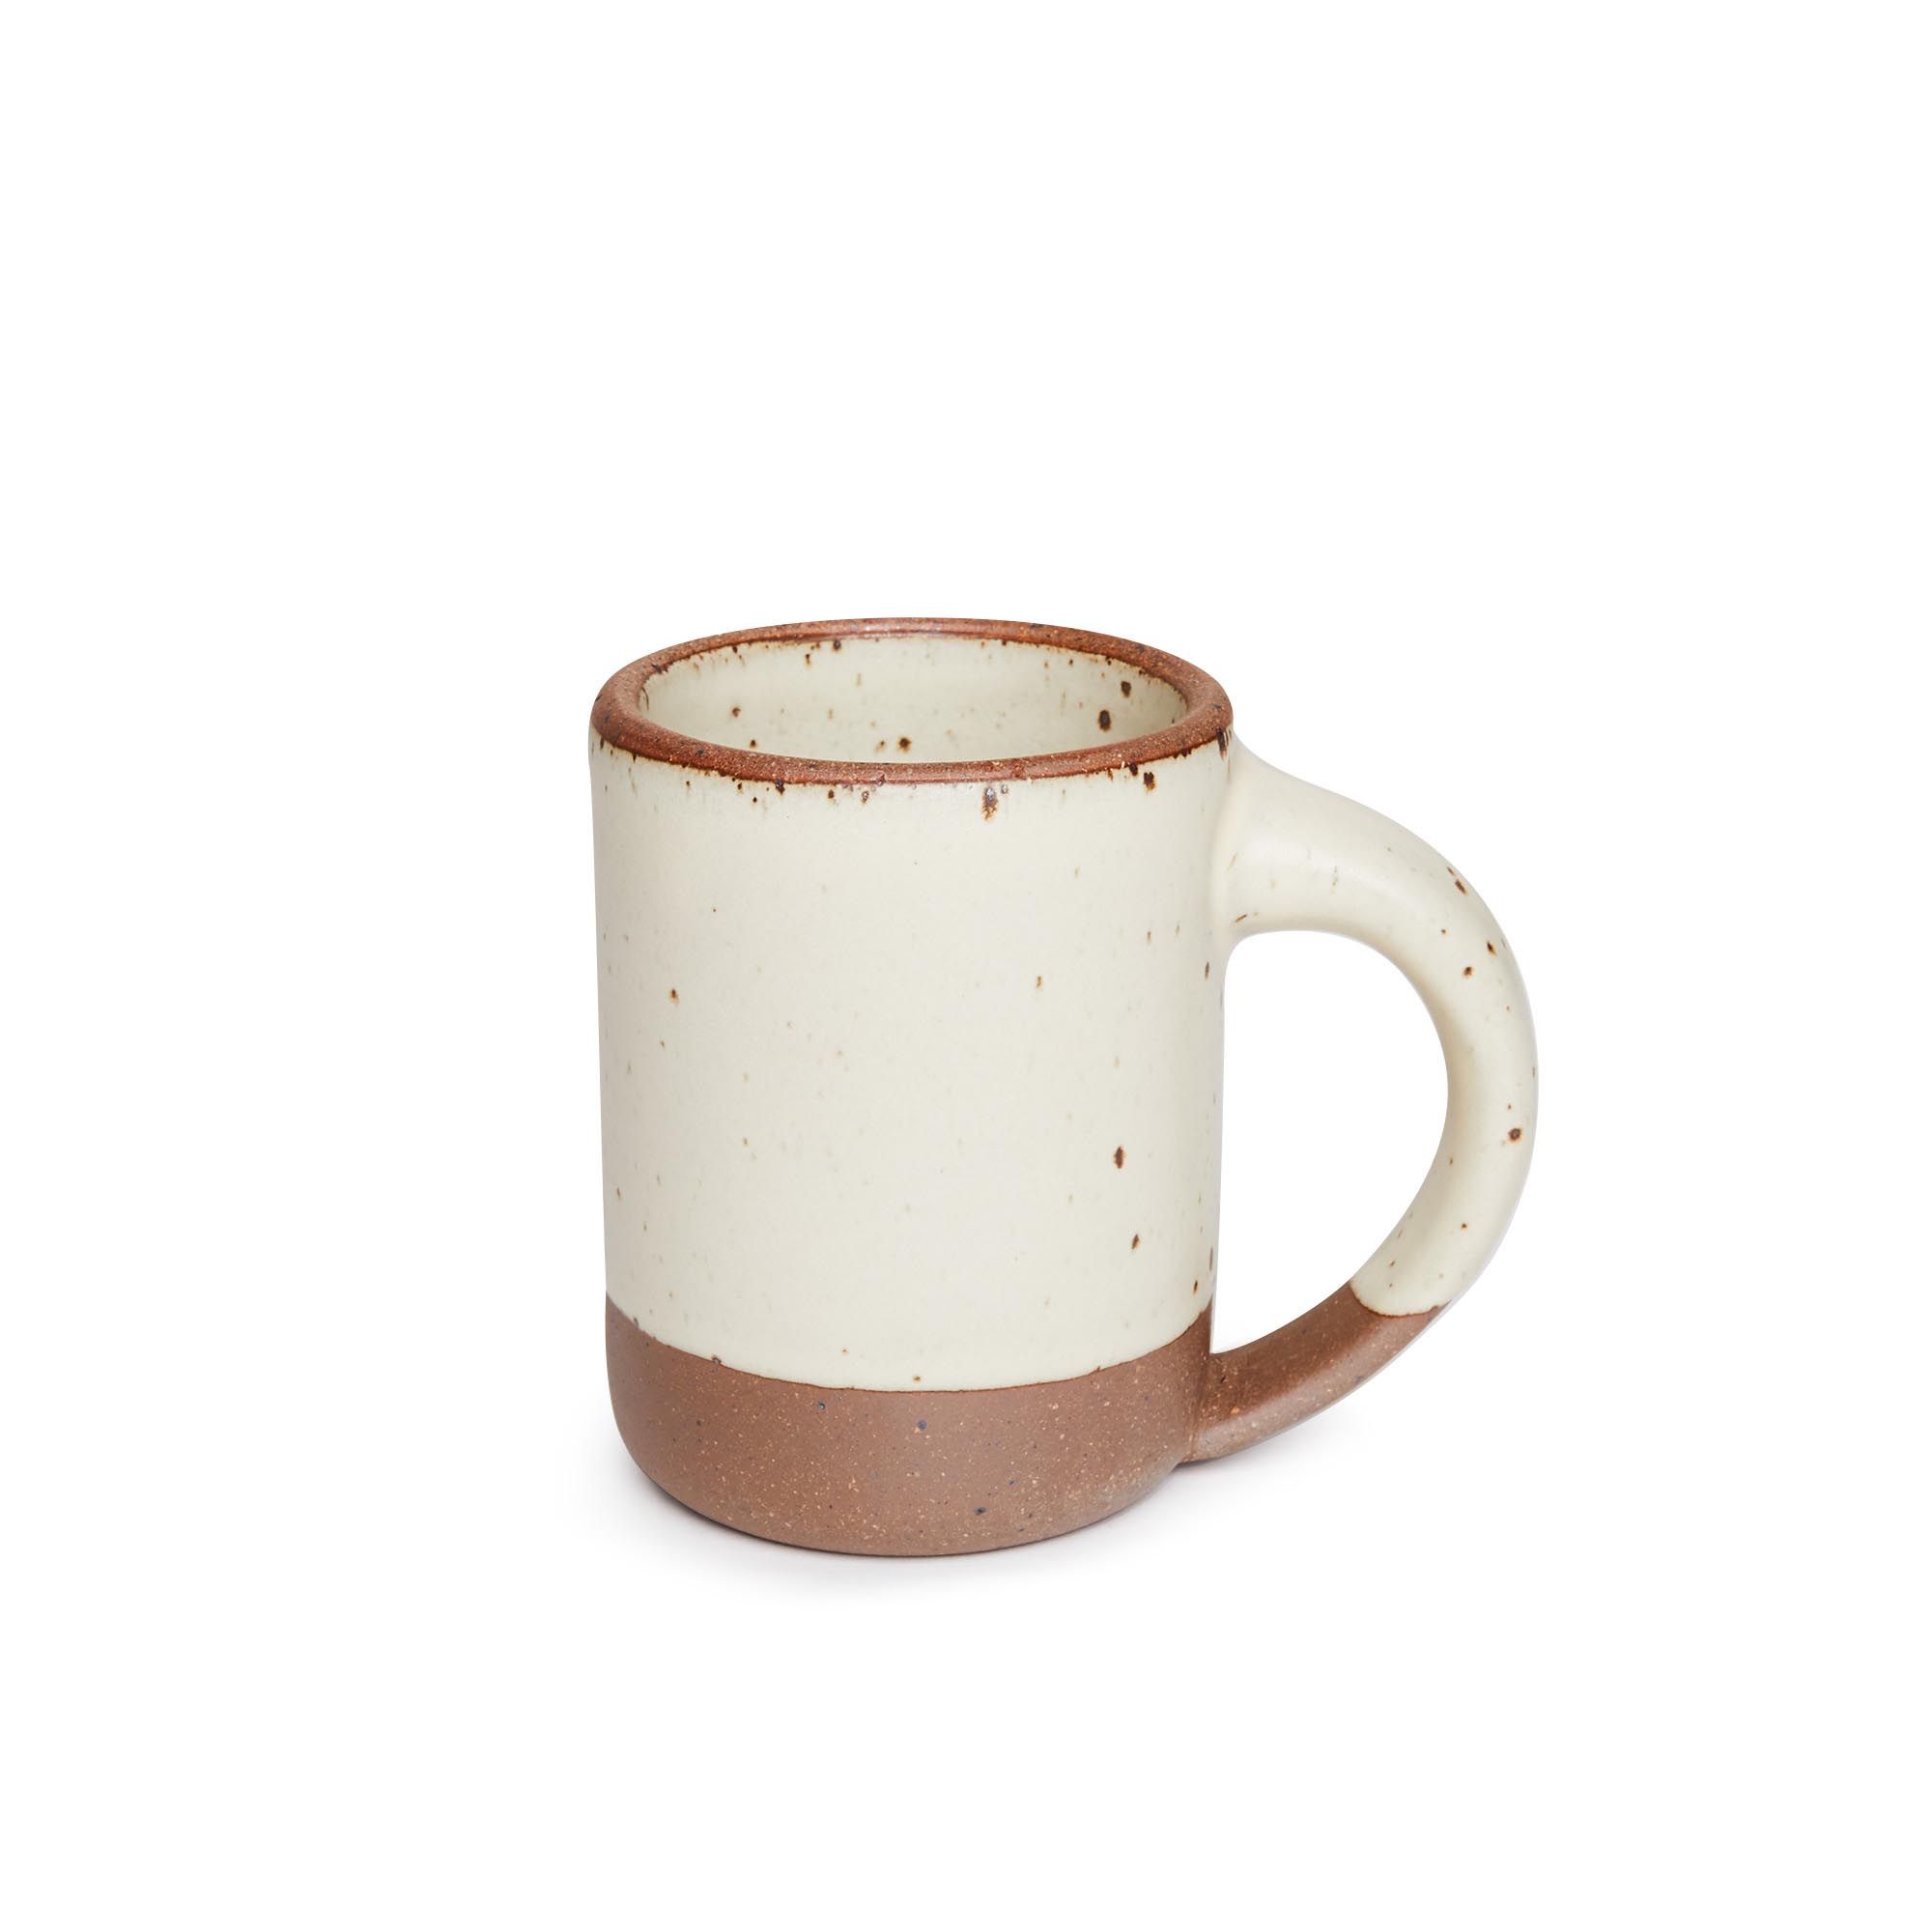 A medium sized ceramic mug with handle in a warm, tan-toned, off-white color featuring iron speckles and unglazed rim and bottom base.